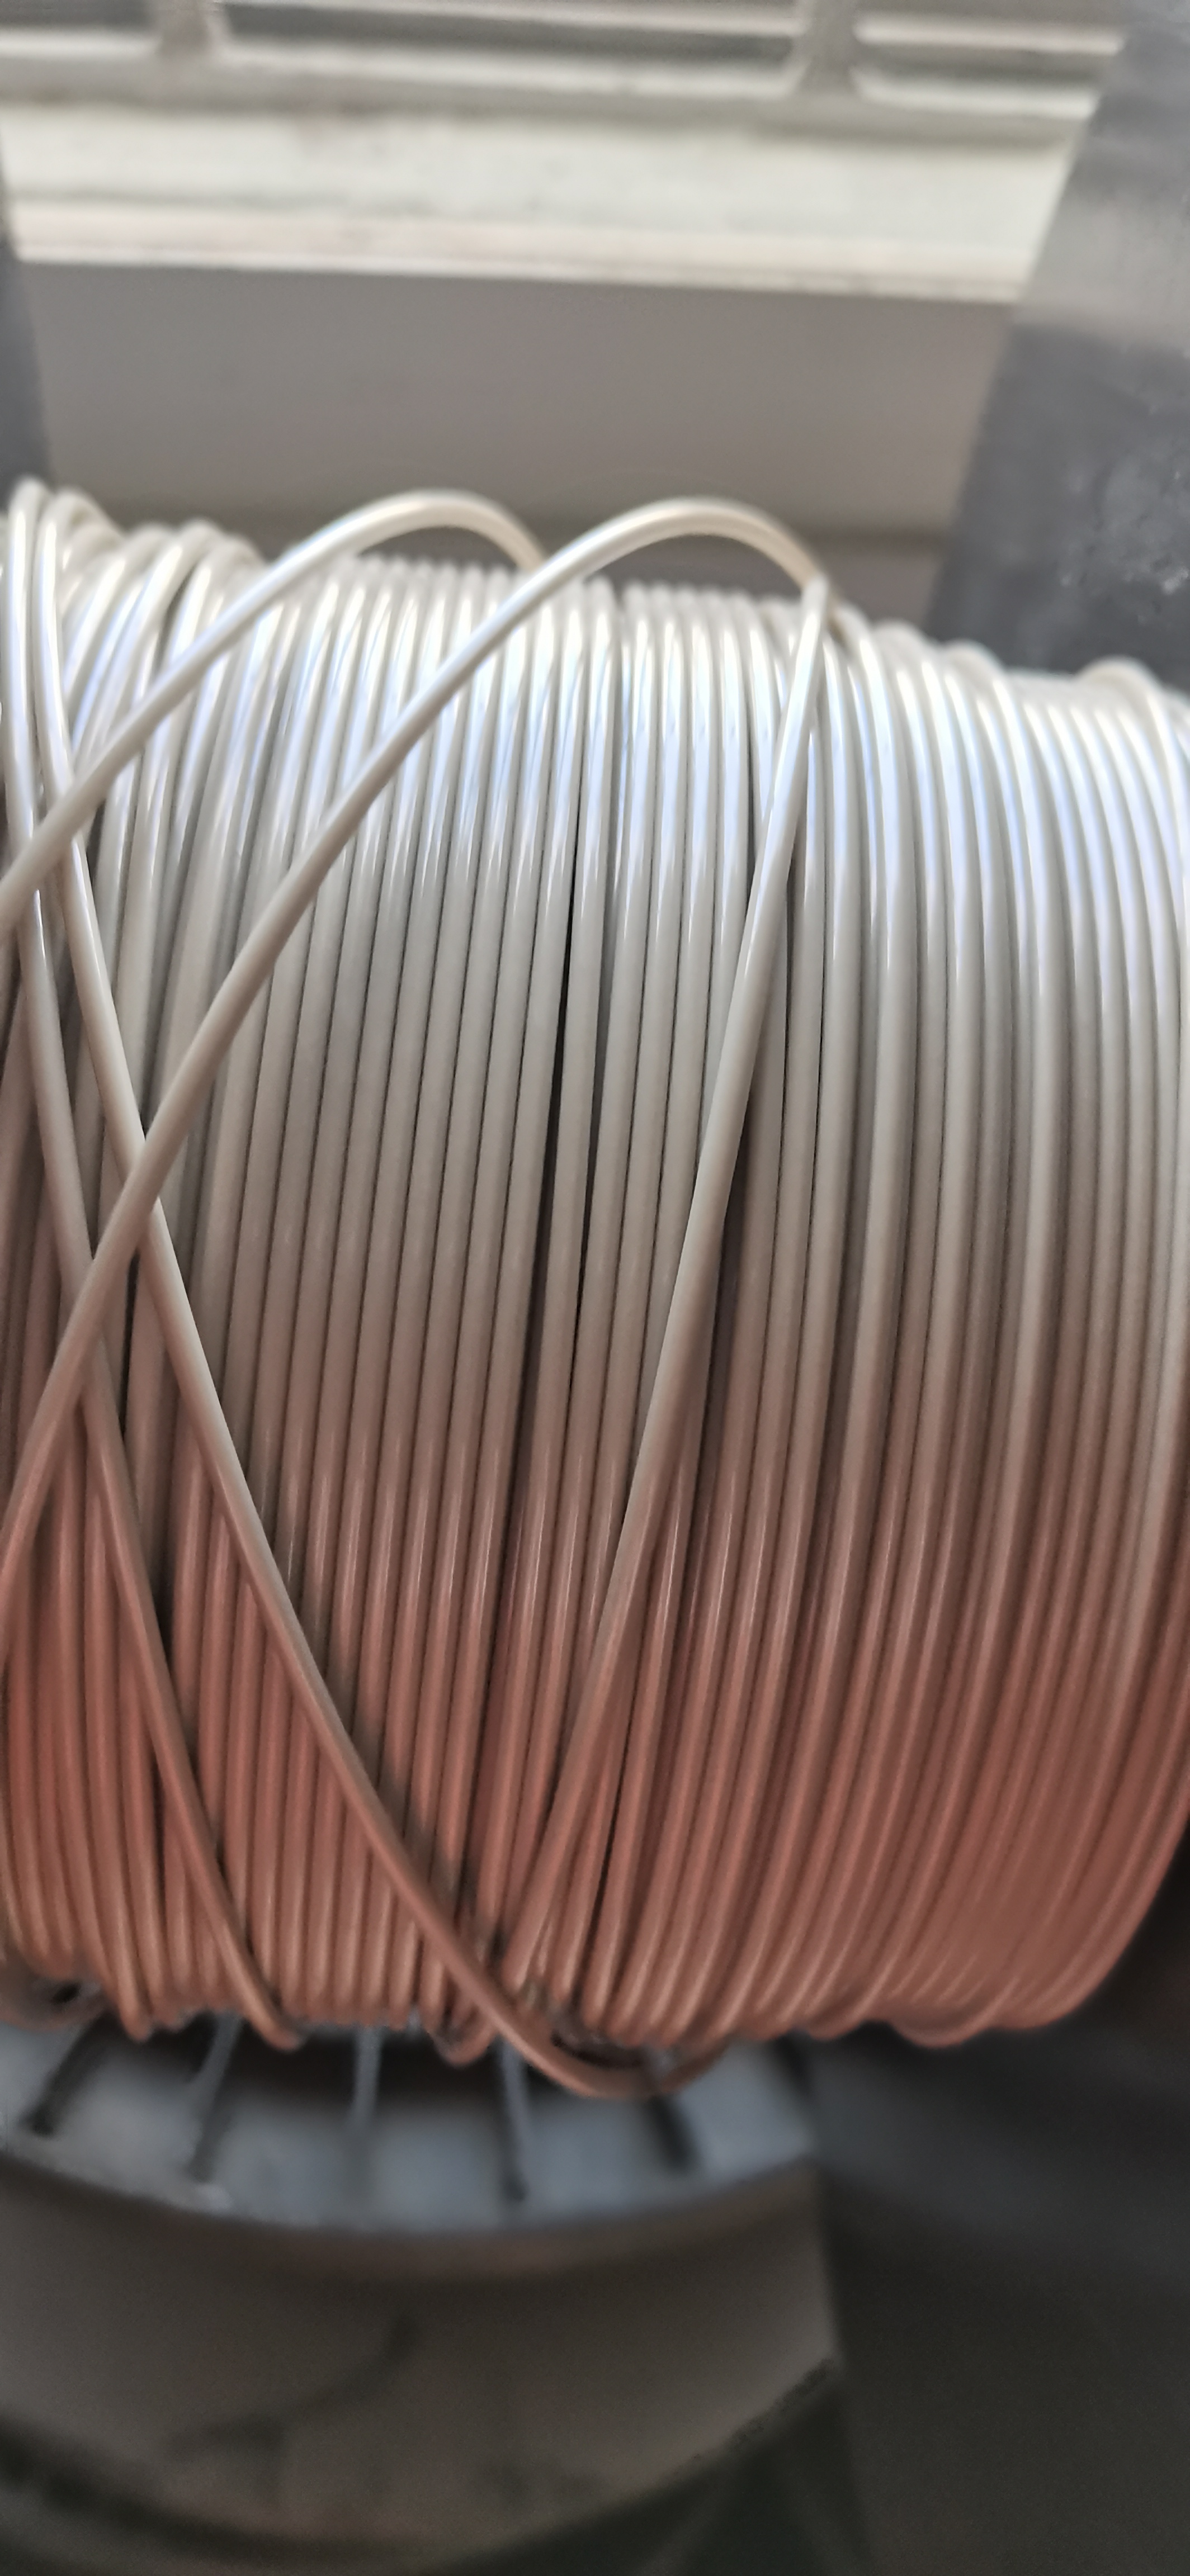 peek wire and cable | MIL-P-46183 peek wire